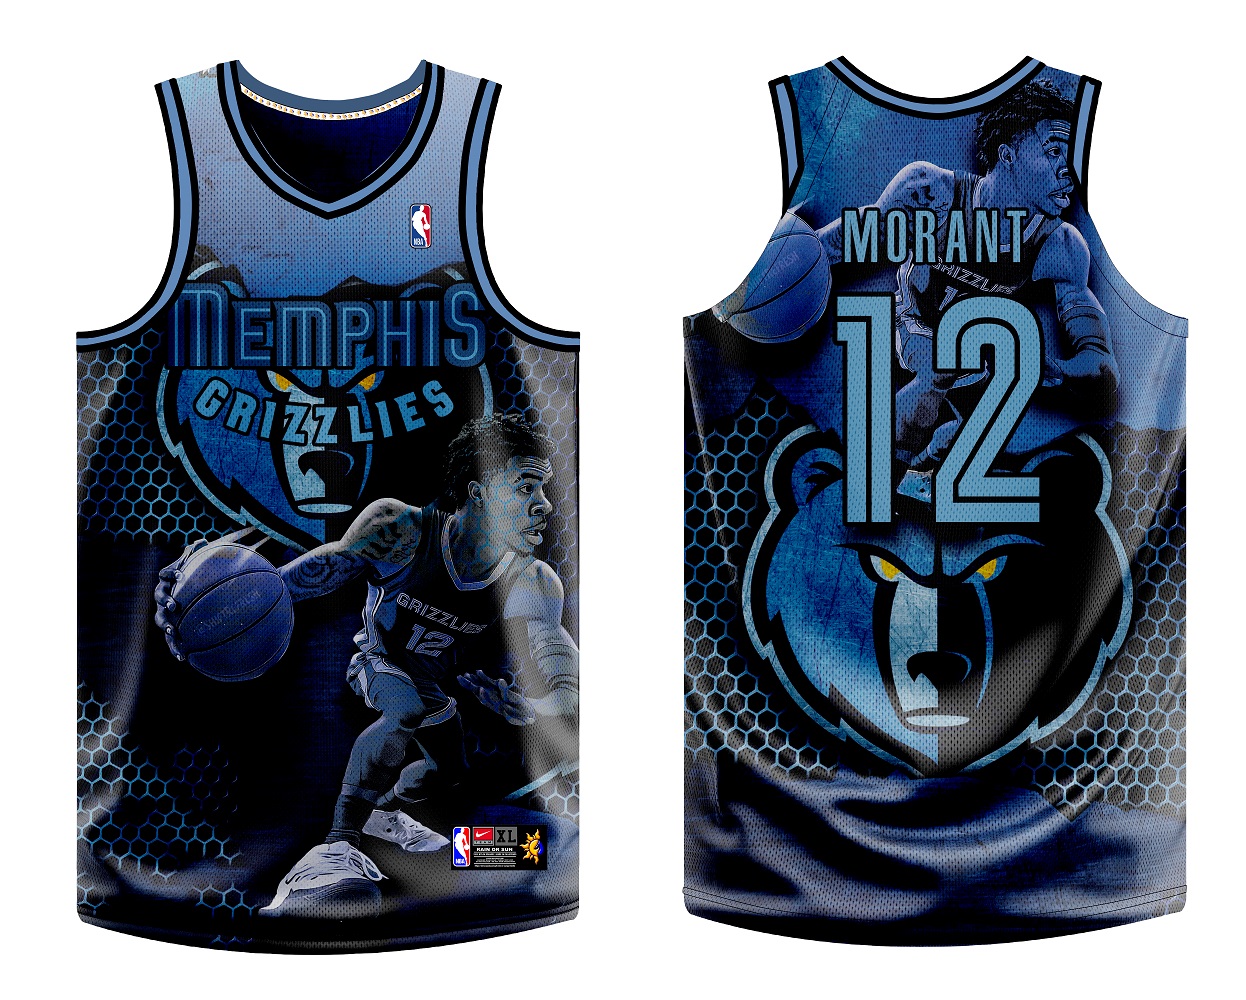 FREE CUSTOMIZE OF NAME AND NUMBER ONLY LATEST MEMPHIS 08 JA MORANT BASKETBALL  JERSEY full sublimation high quality fabrics jersey